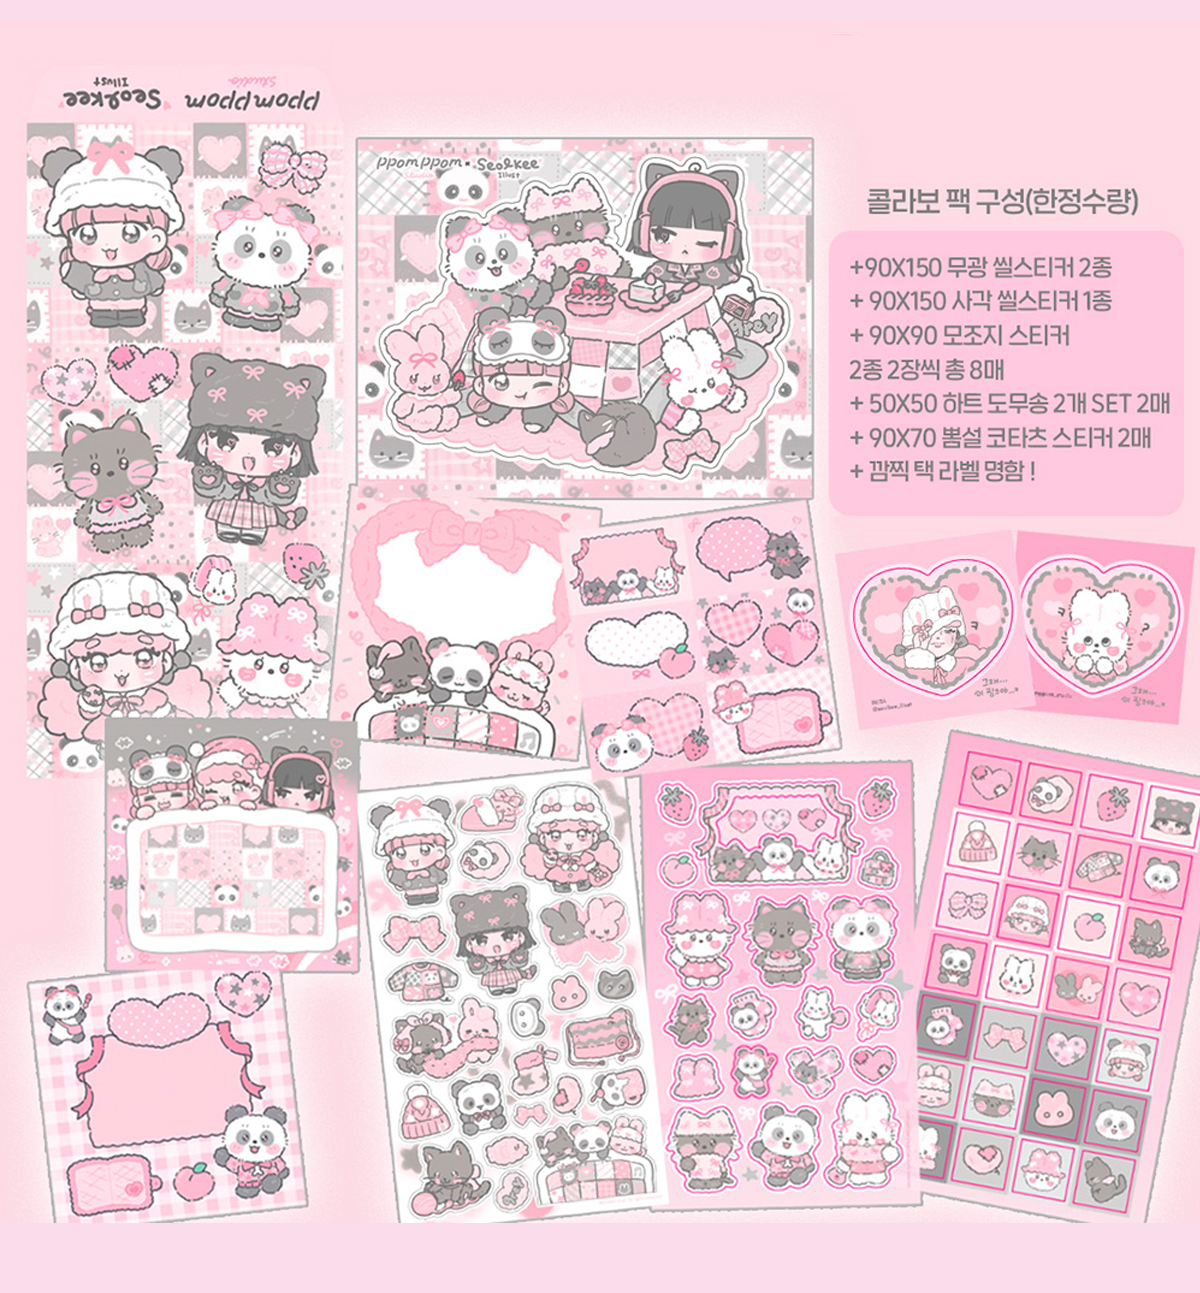 Seolkee x Poomppom Collaboration Pack [12 Stickers]